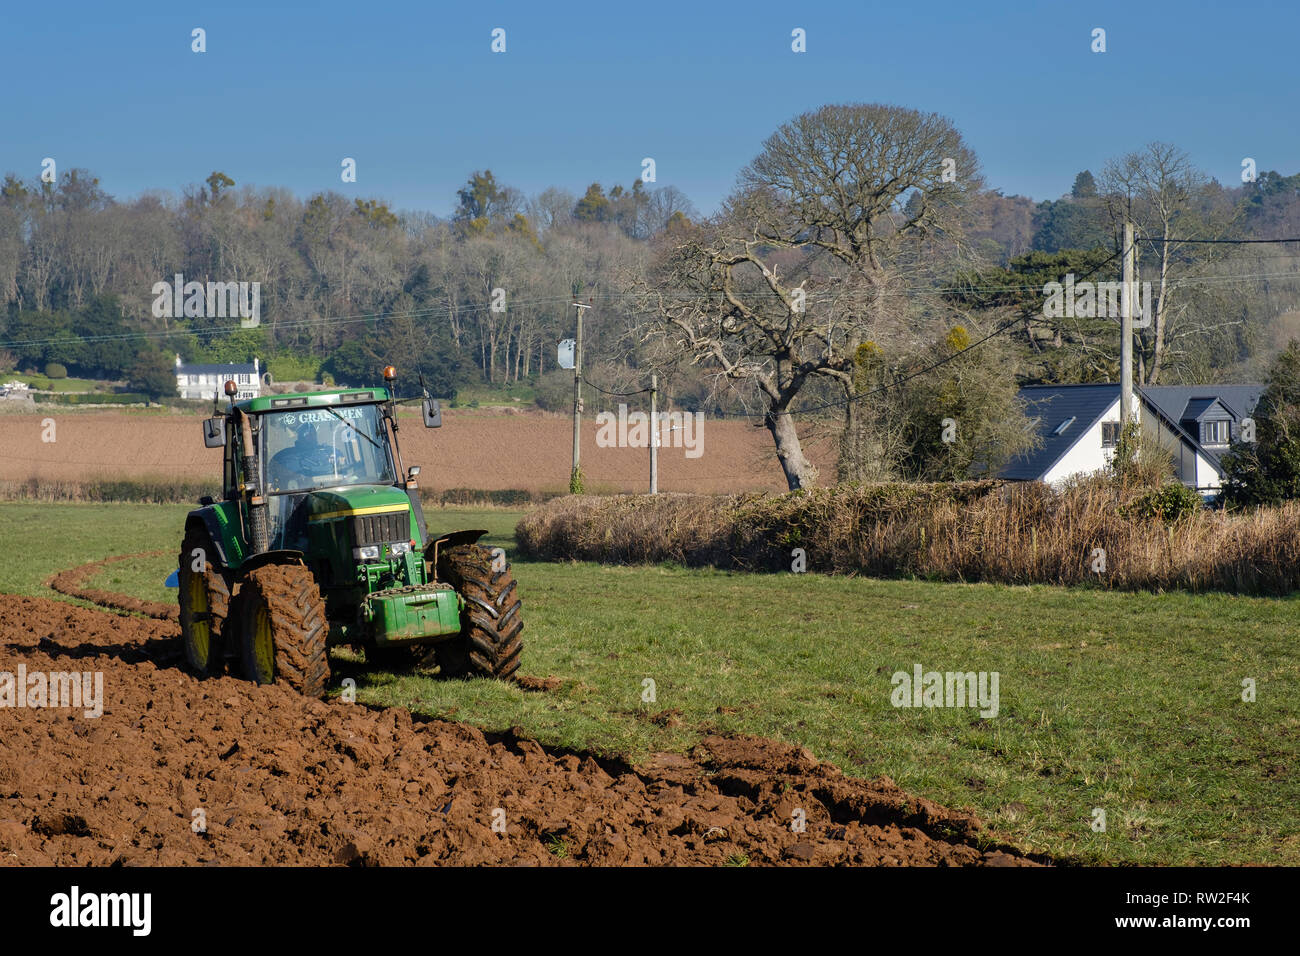 TRACTOR SPRING PLOUGHING. Stock Photo